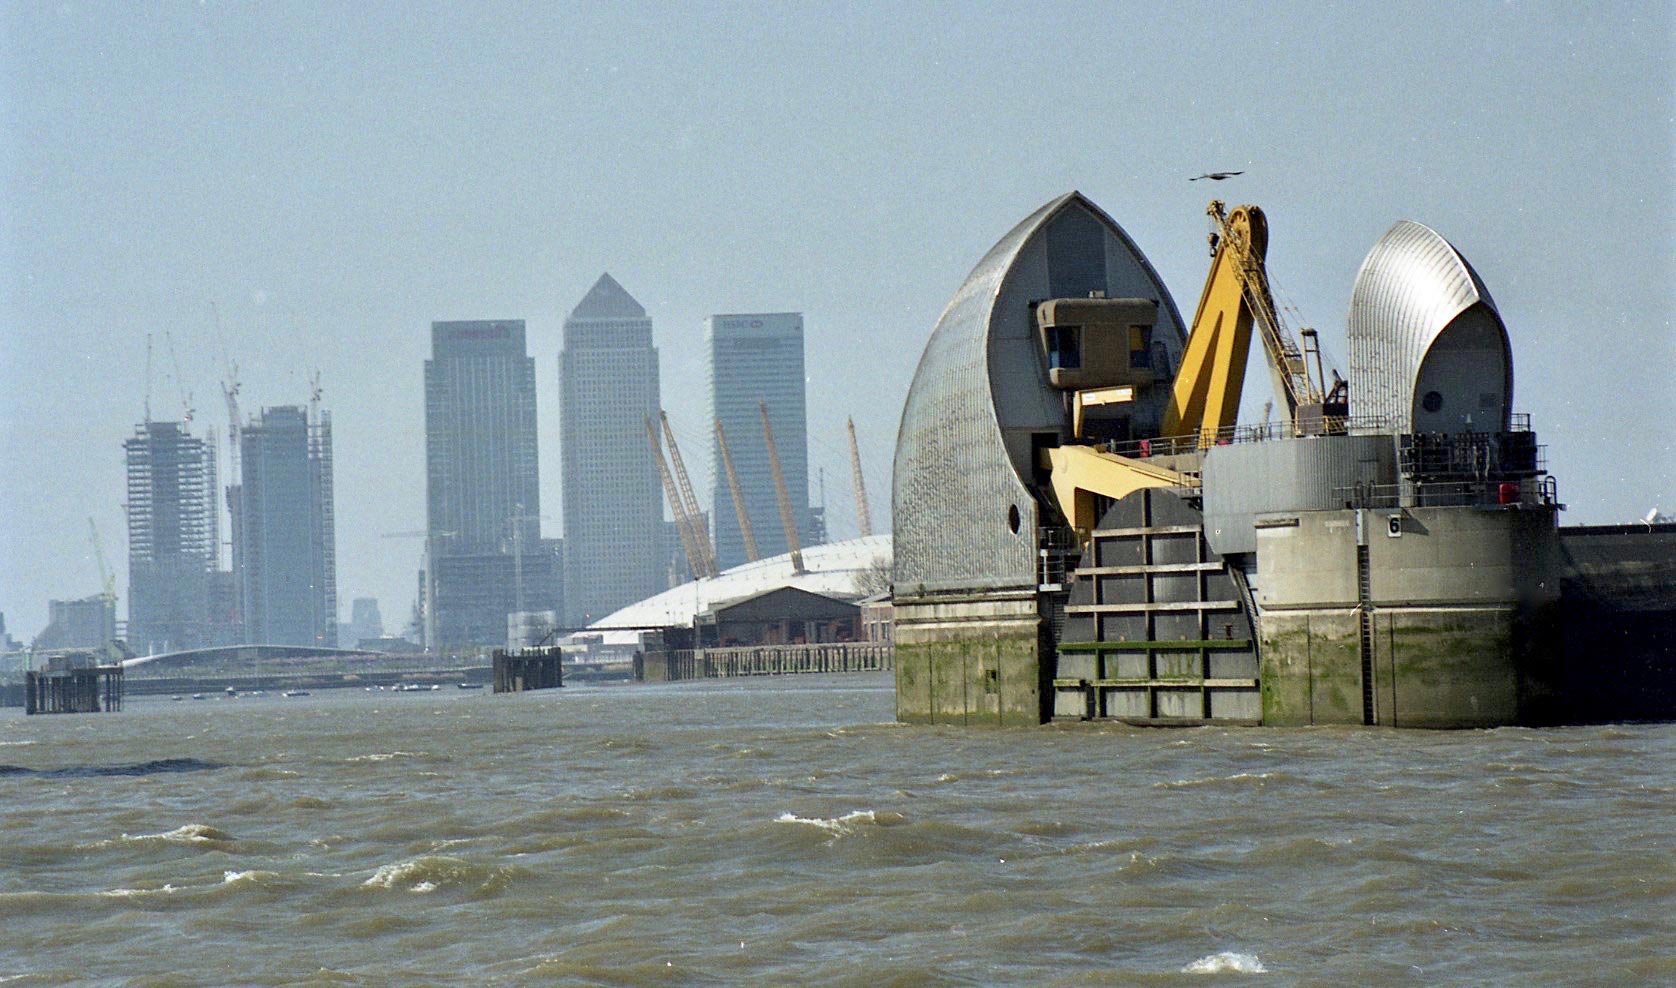 Thames Barrier and Canary Wharf 6.4.02 1